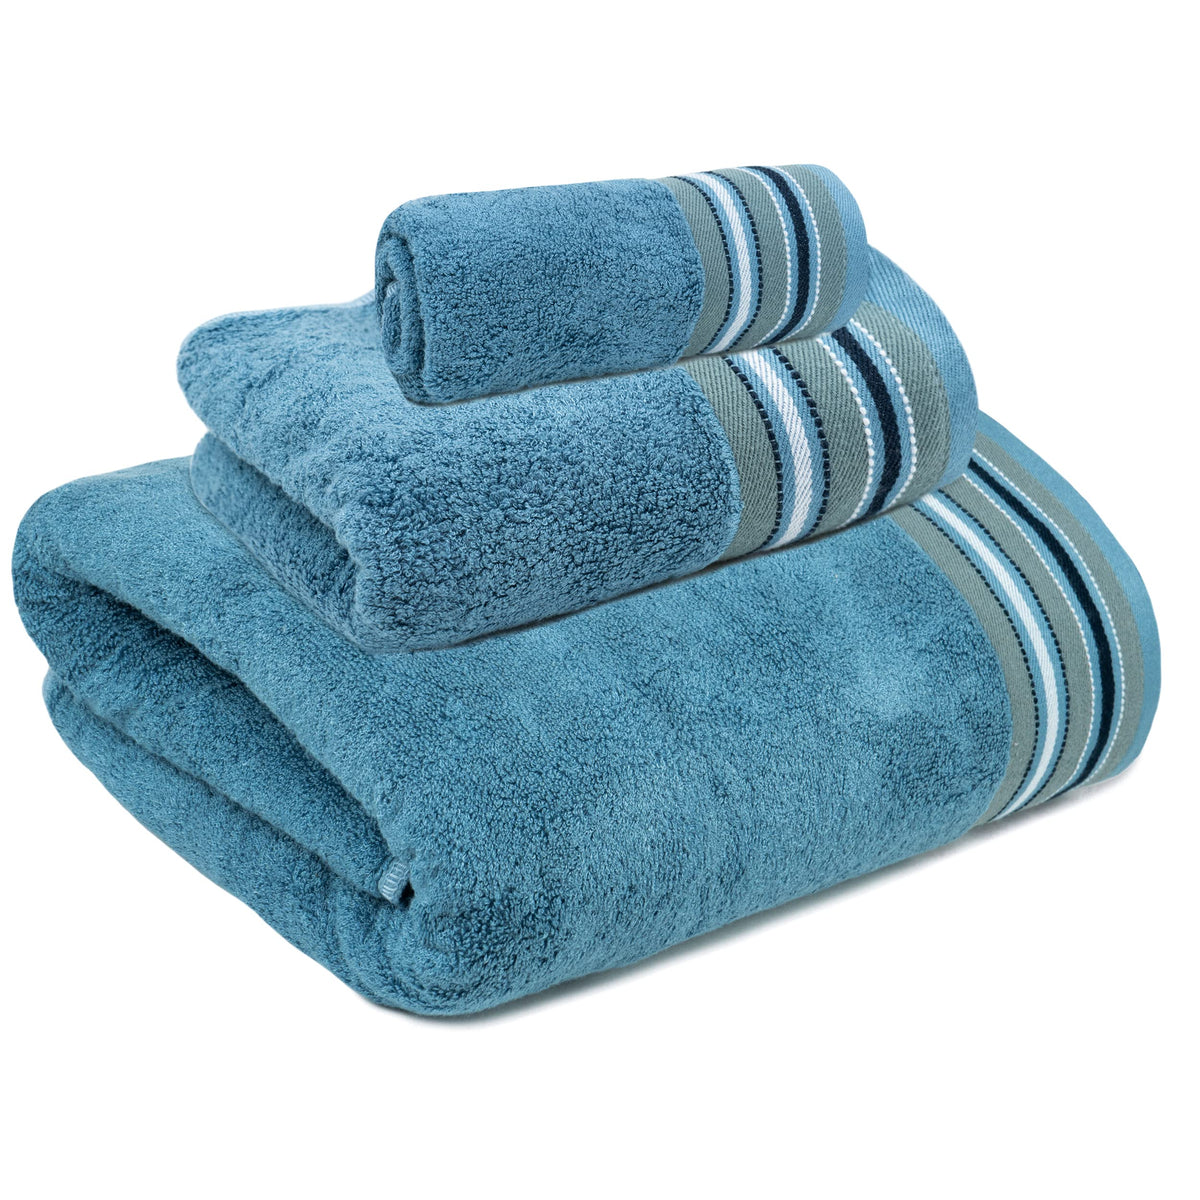 Mush Designer Bamboo Towelset |Ultra Soft, Absorbent & Quick Dry Towel for Bath, Beach, Pool, Travel, Spa and Yoga (3 Pieces Towelset, Emerald Blue)